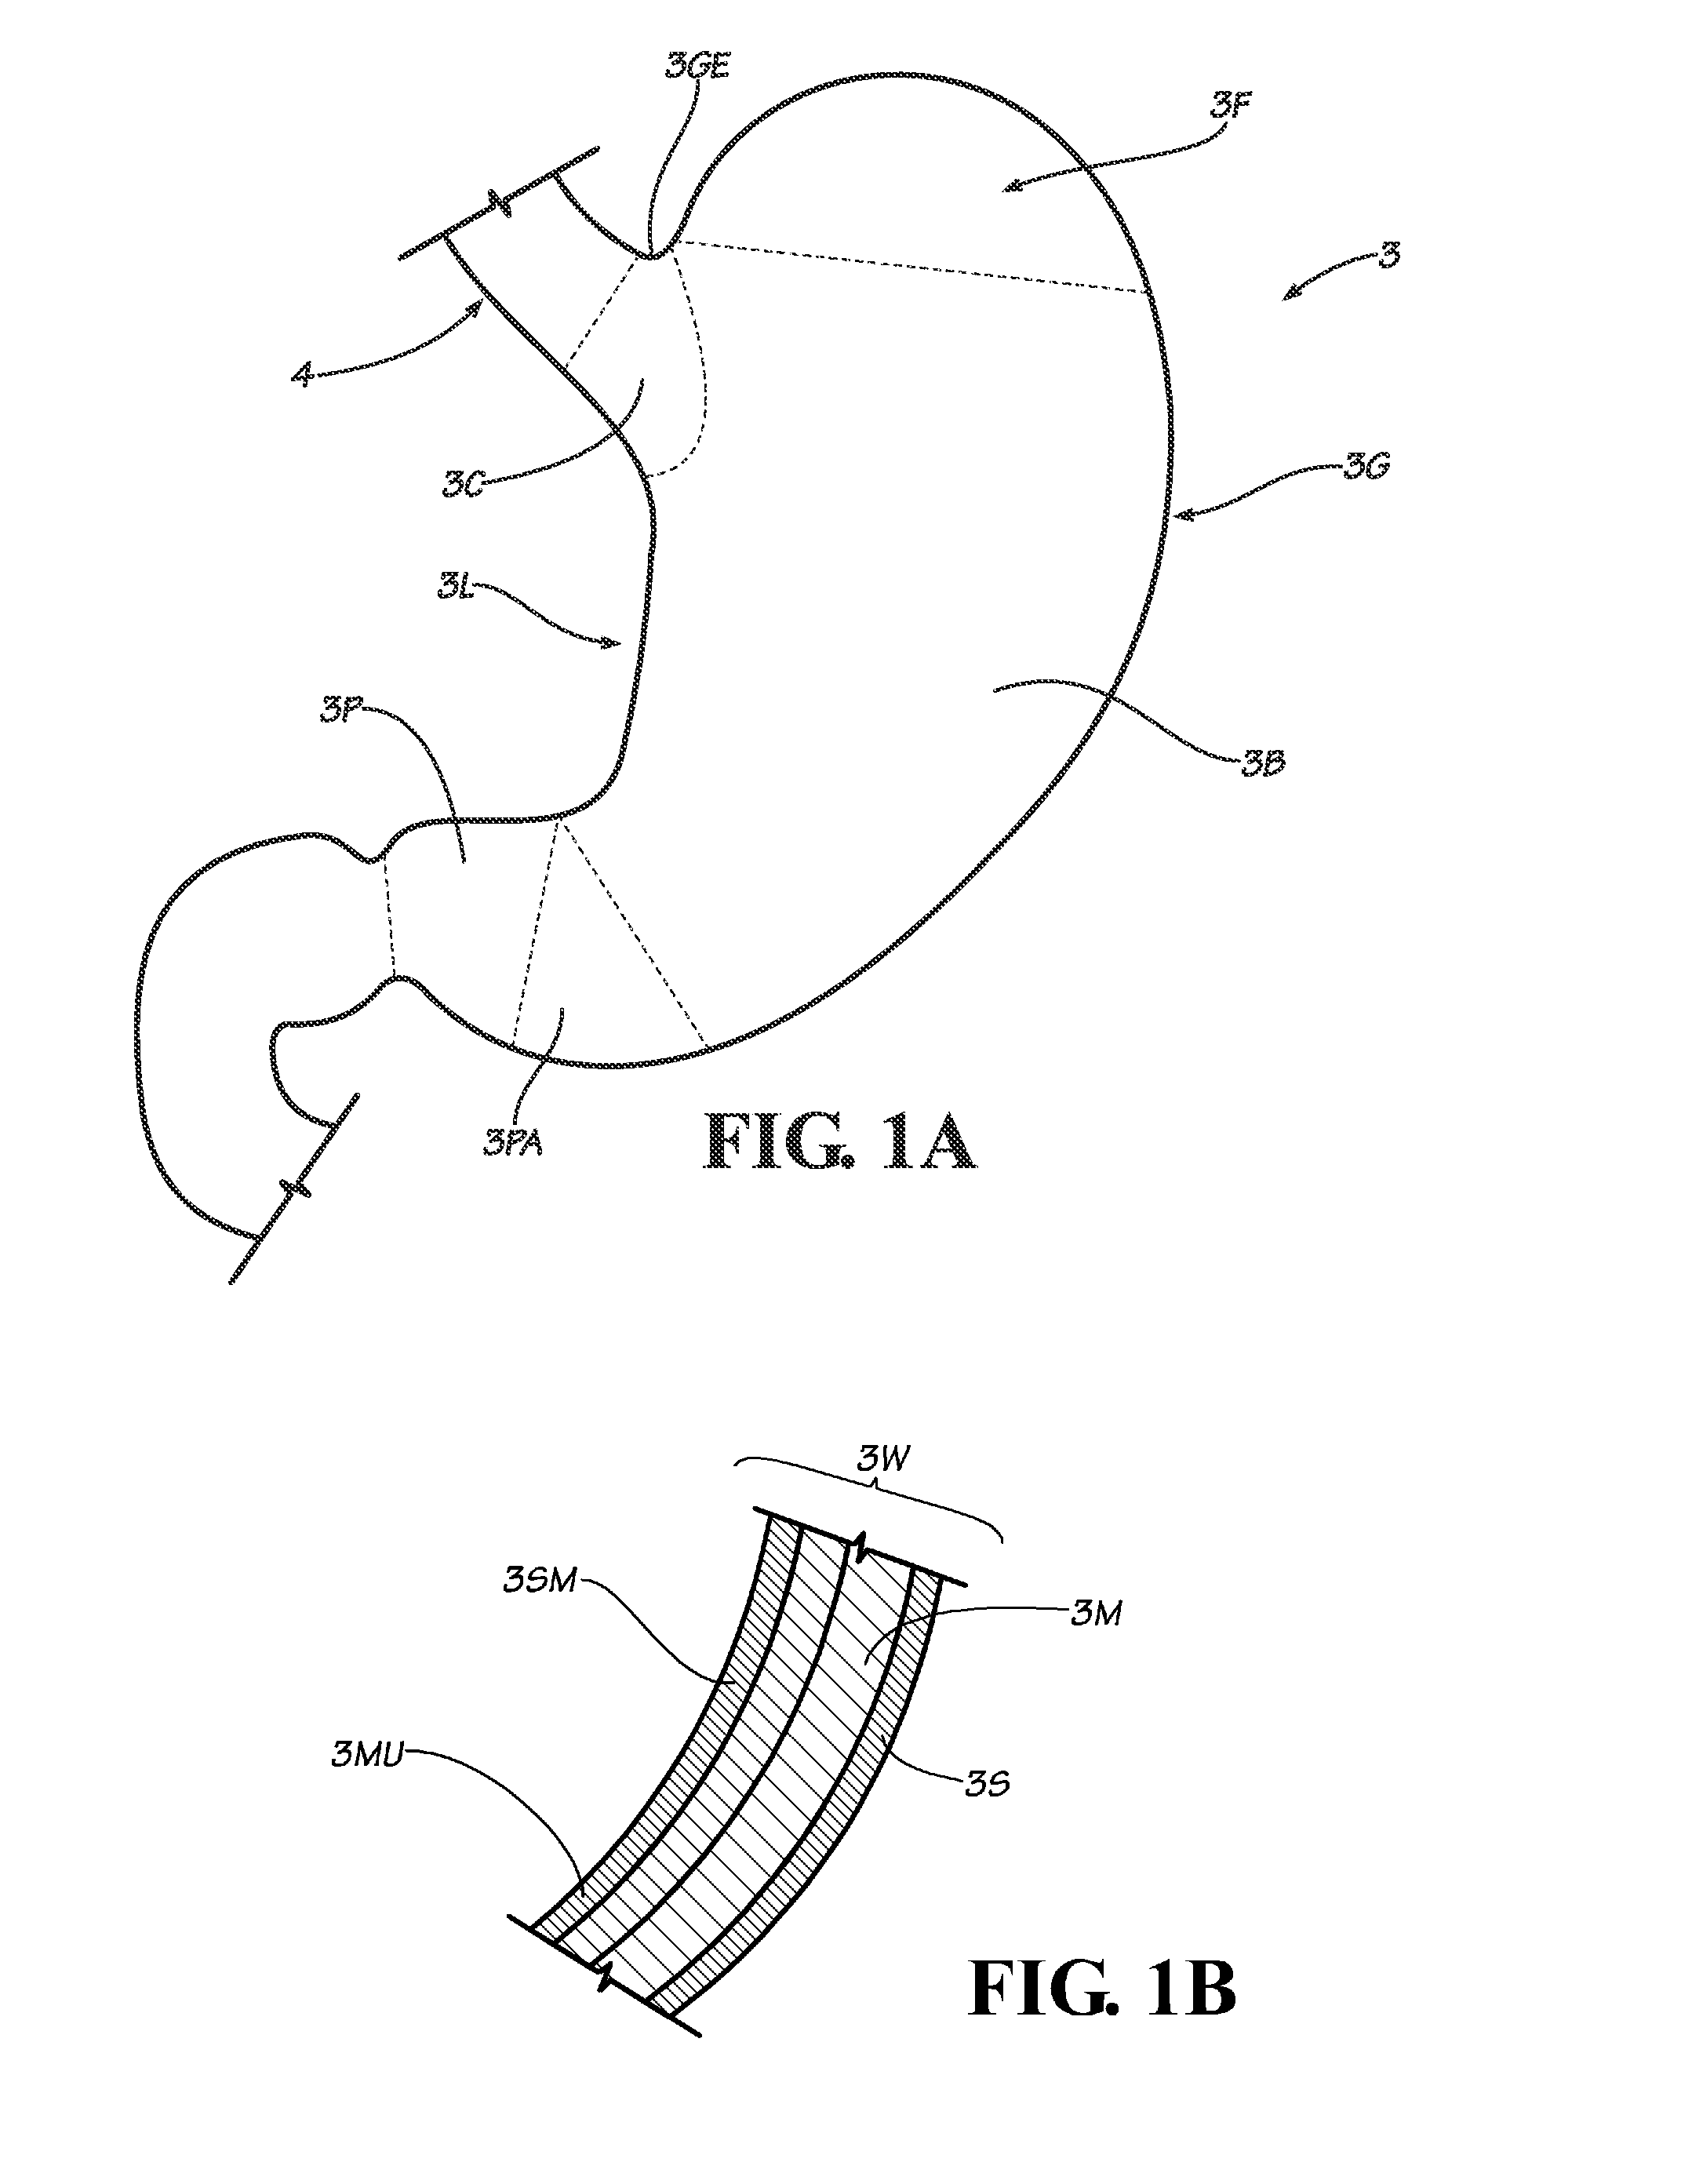 Methods, instruments and devices for extragastric reduction of stomach volume